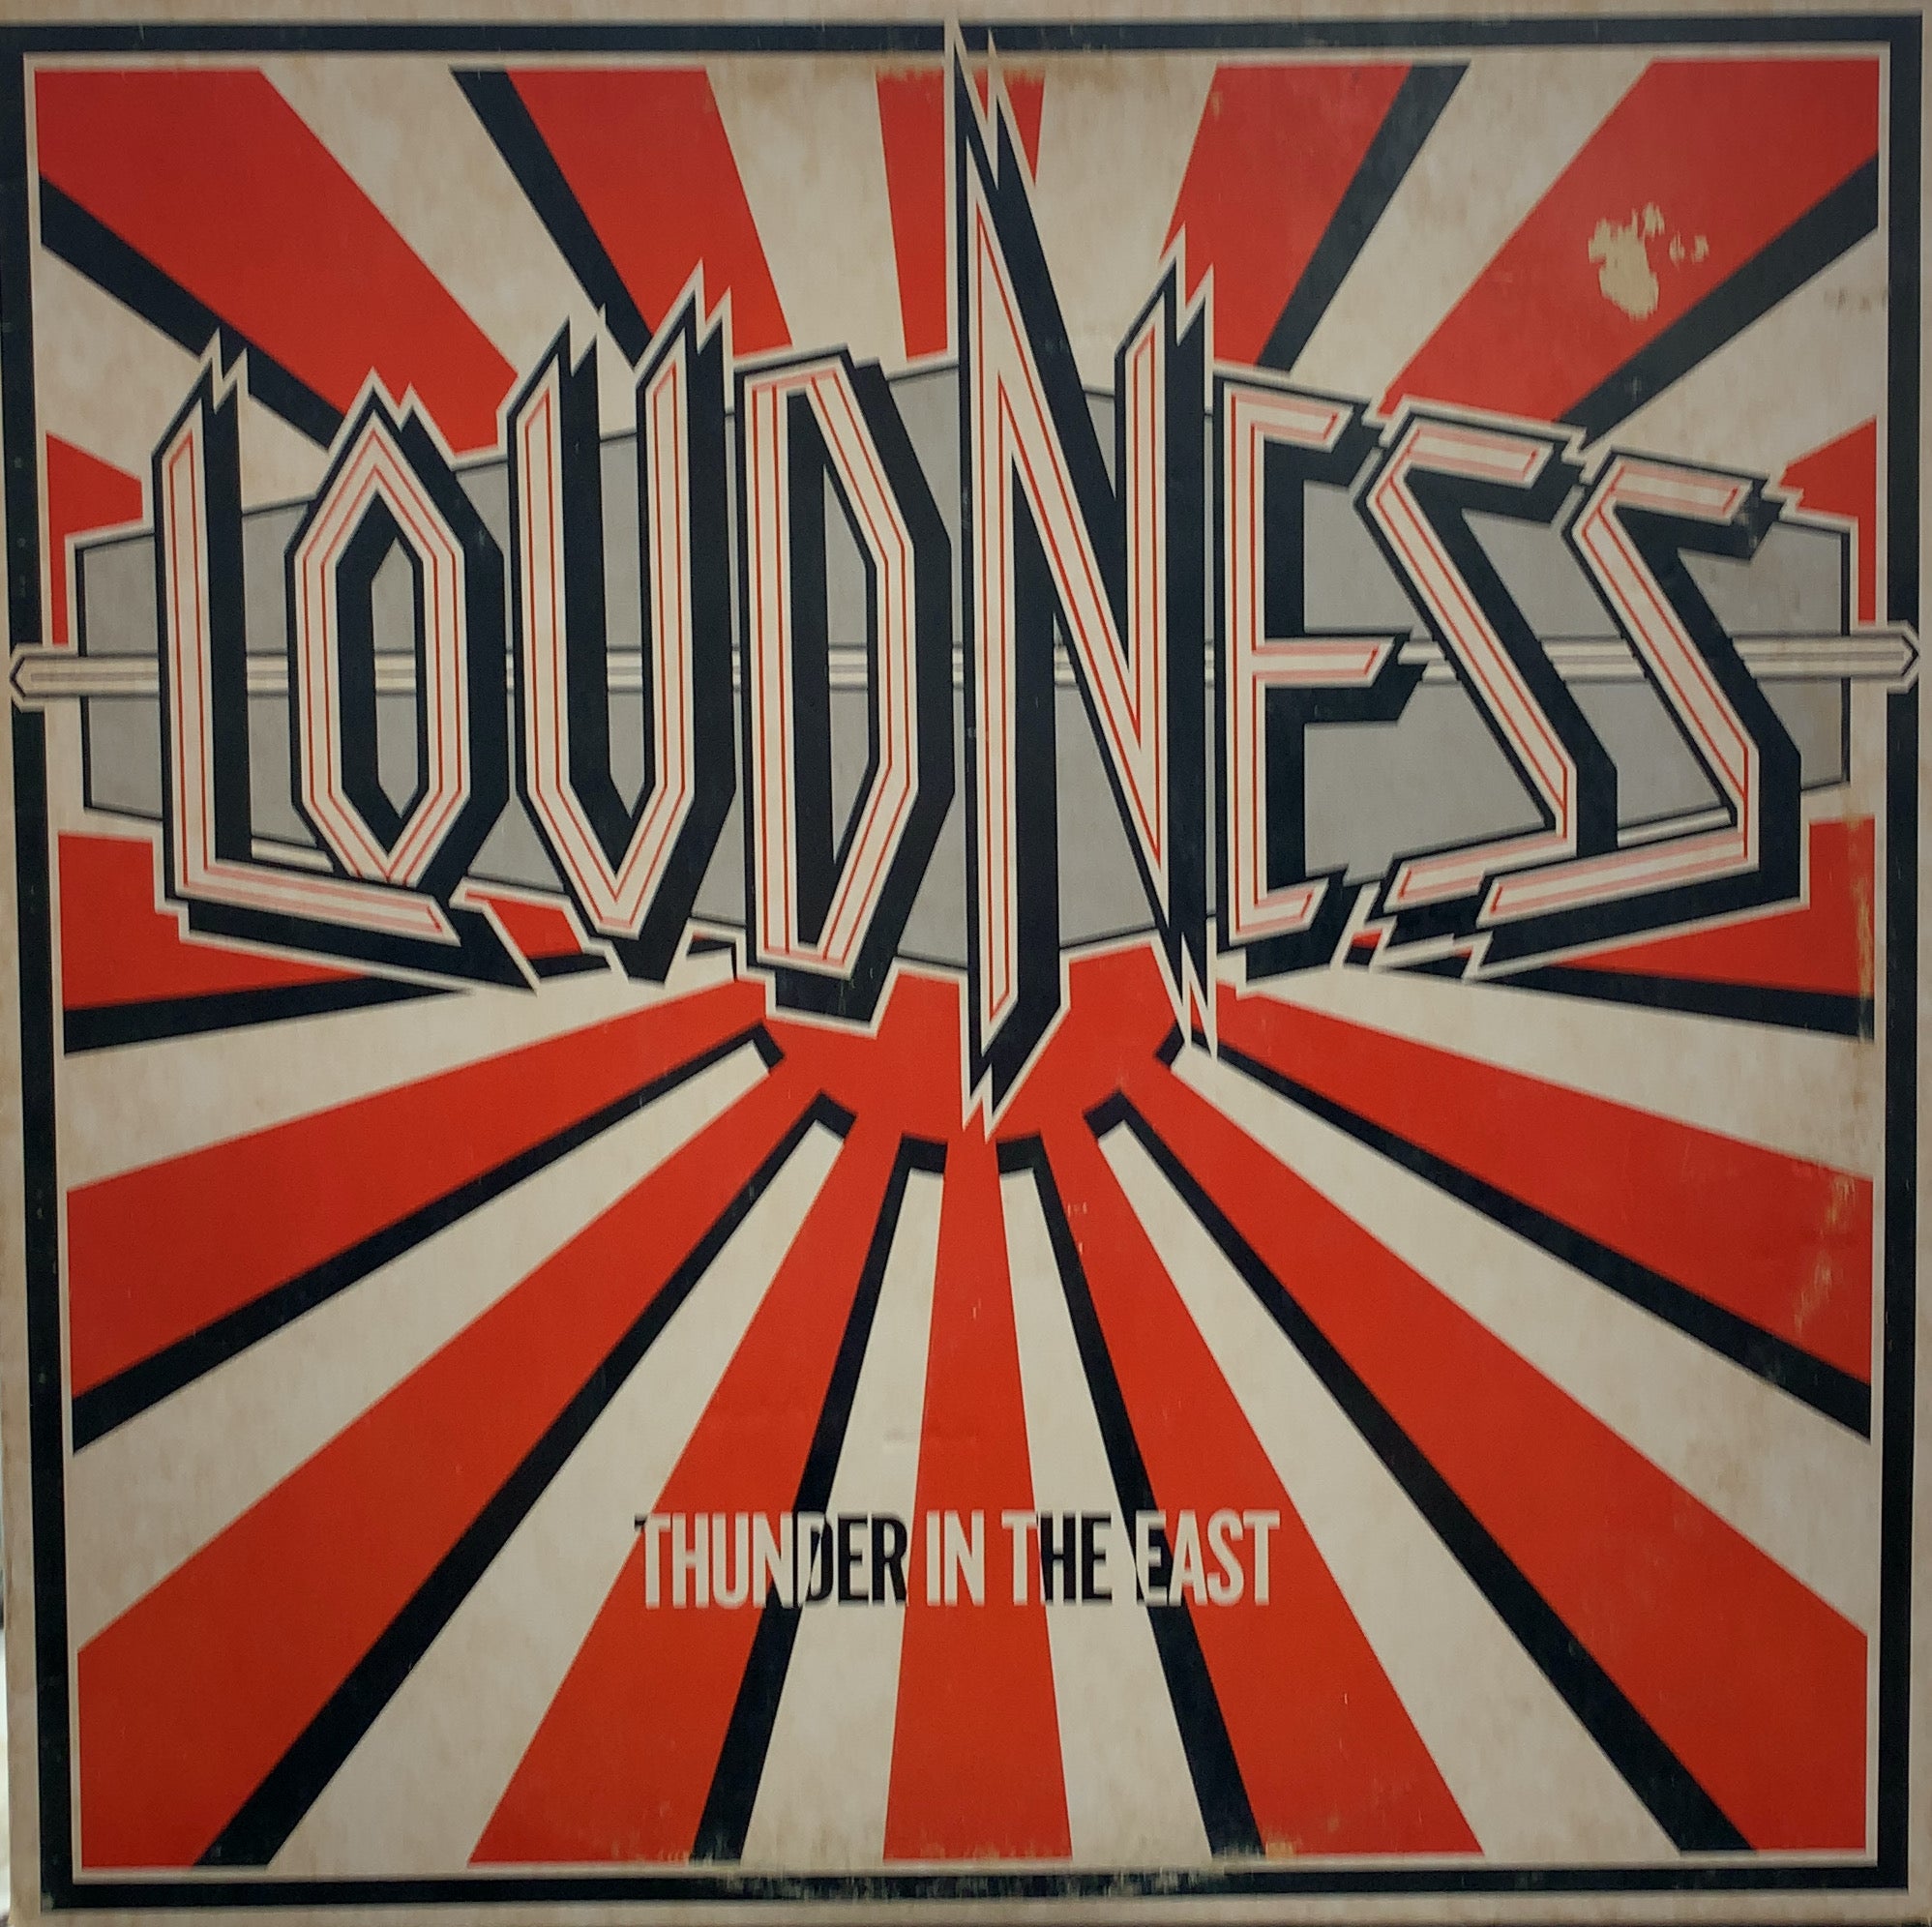 LOUDNESS THUNDER IN THE EAST LPレコード - yanbunh.com